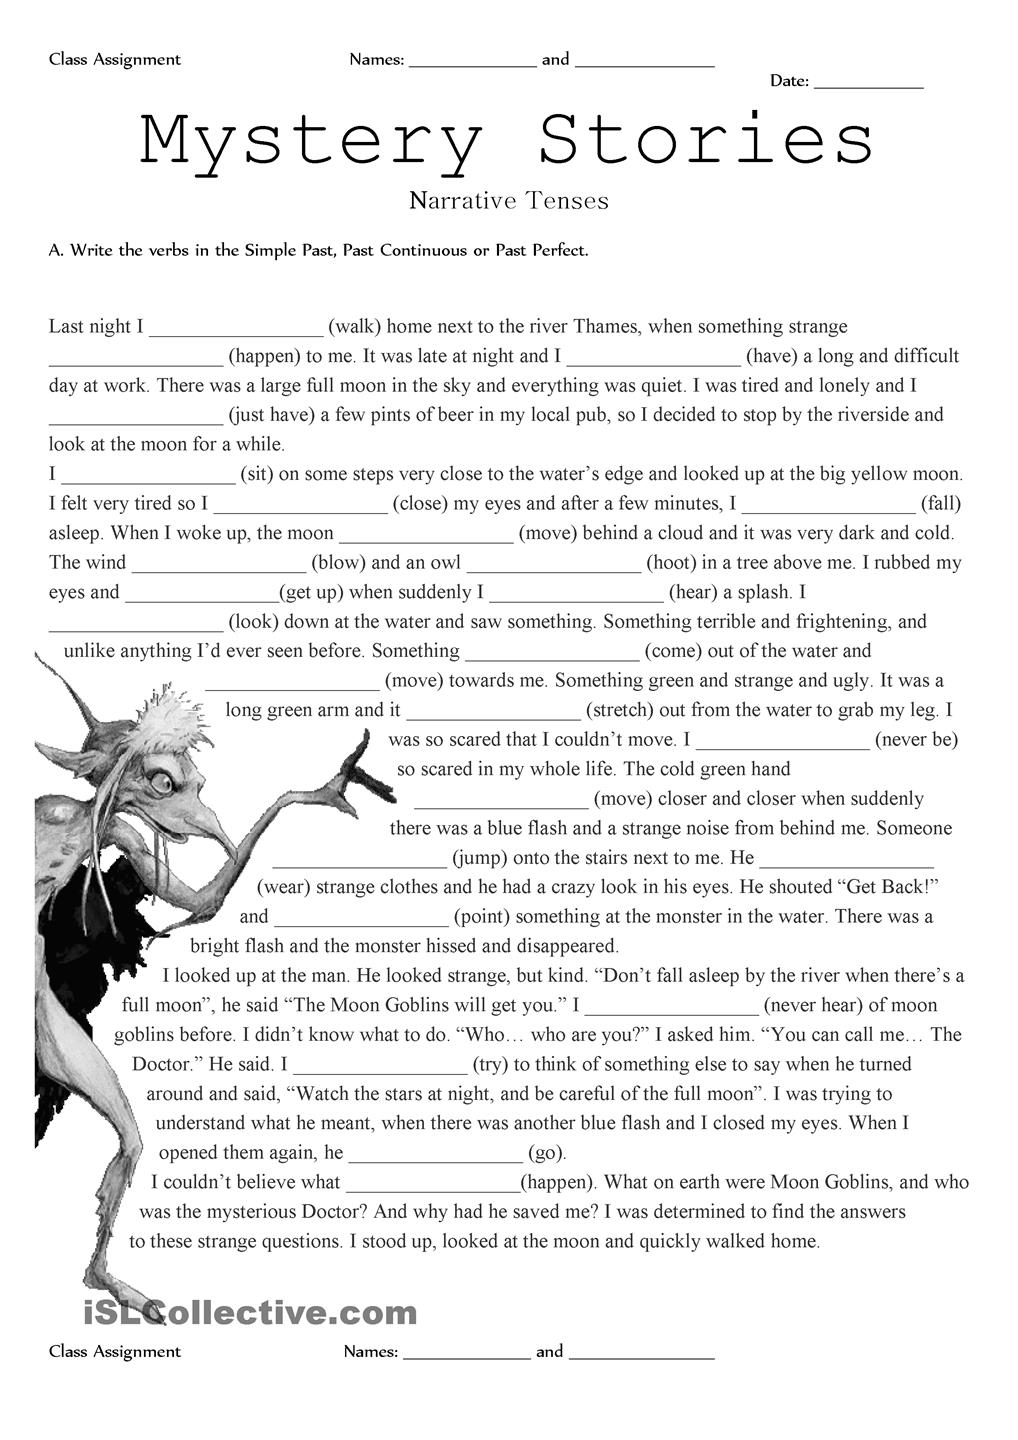 10 Best Images of Printable Government Worksheets - Three Branches of